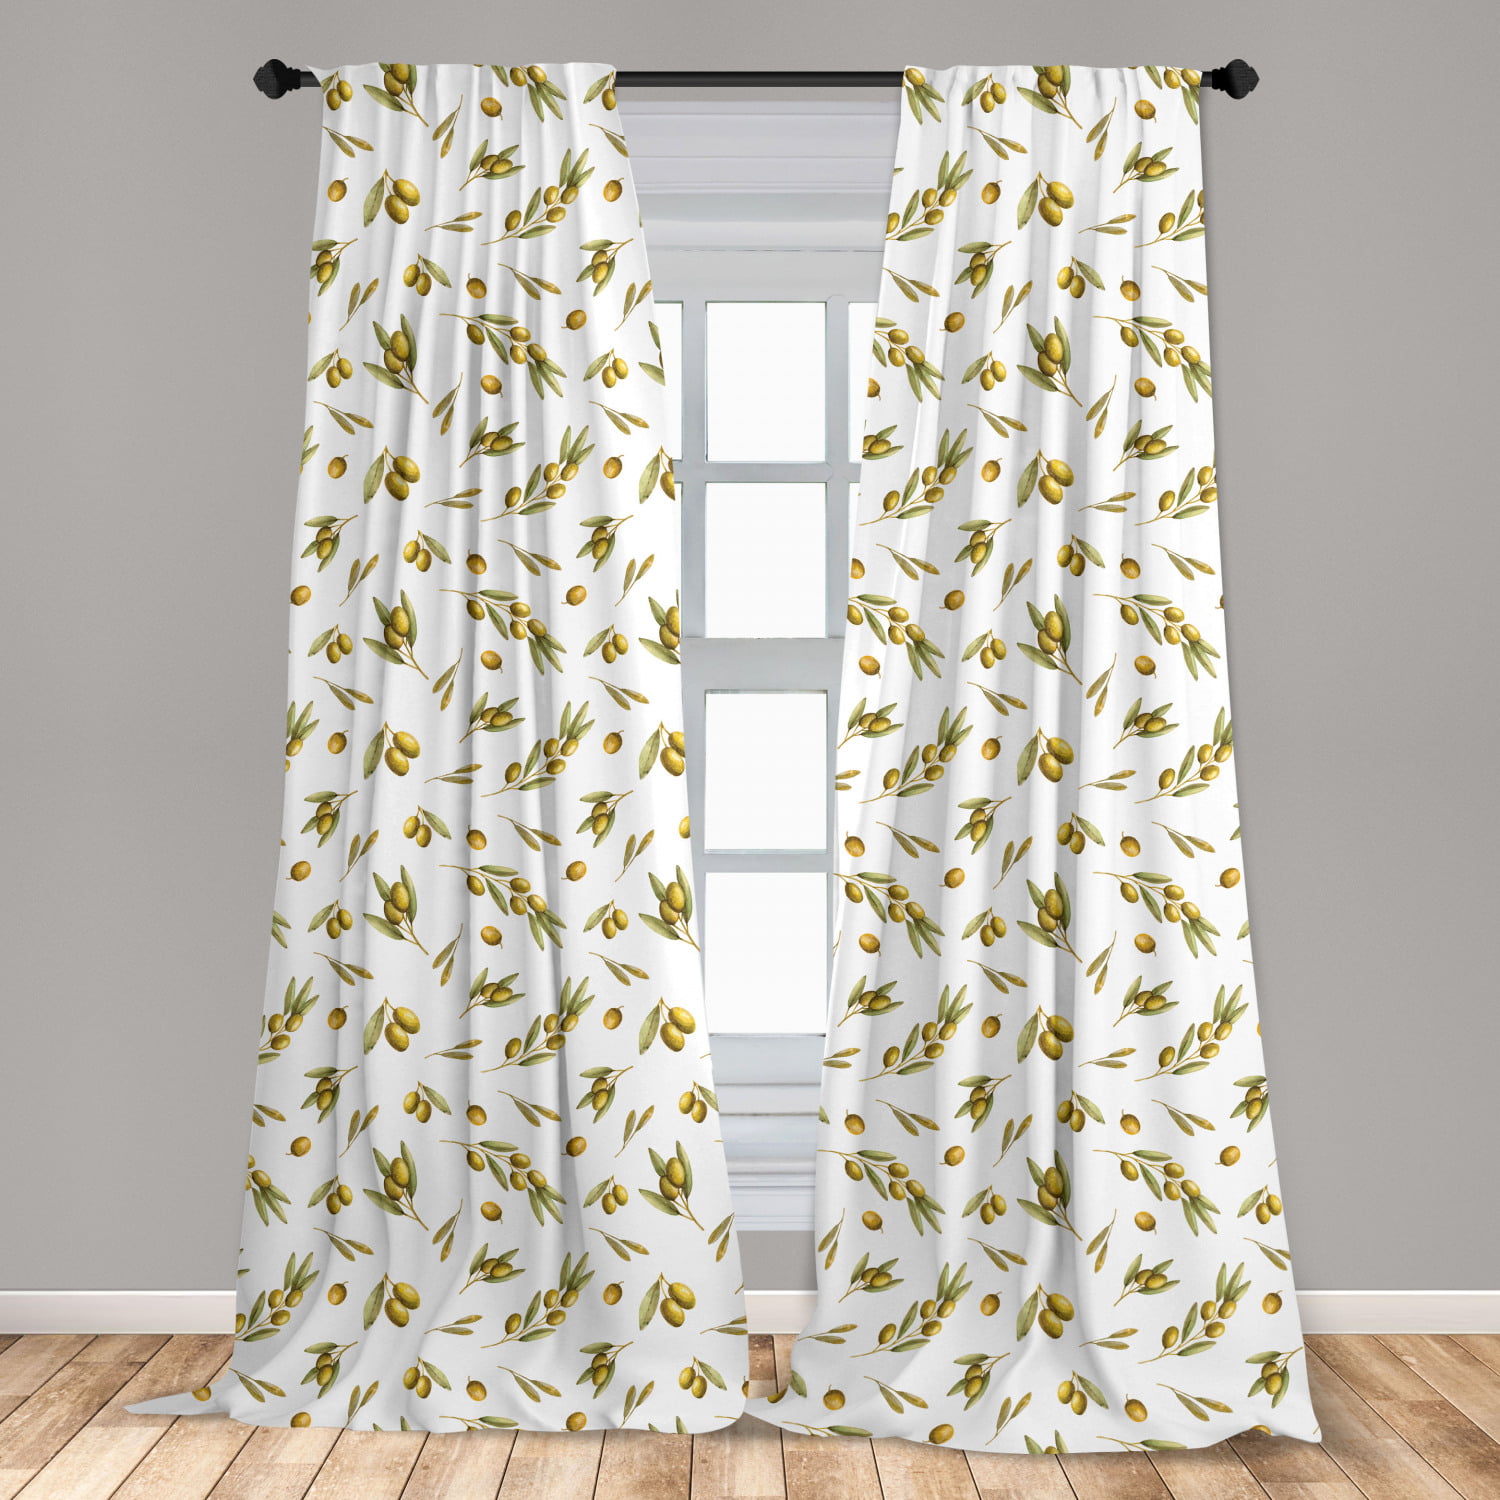 Plant Curtains Blooming Tropical Fern Window Drapes 2 Panel Set 108x63 Inches 